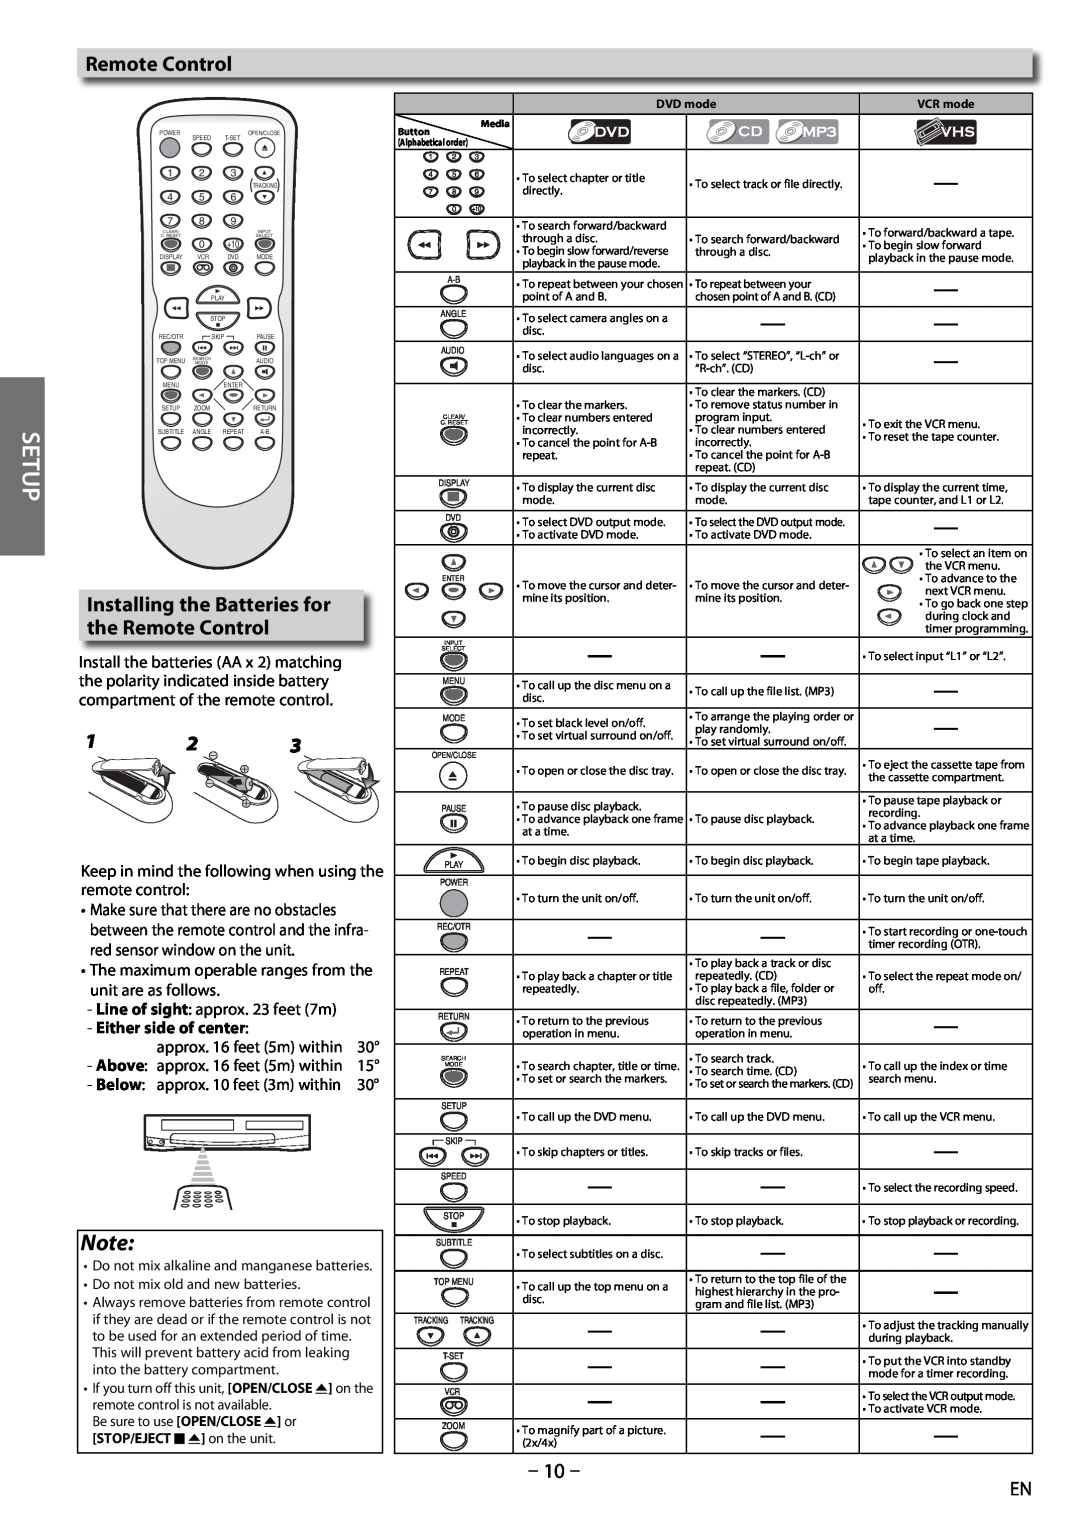 Sylvania dv220sl8 owner manual Installing the Batteries for the Remote Control, Setup, Either side of center, DVD mode 